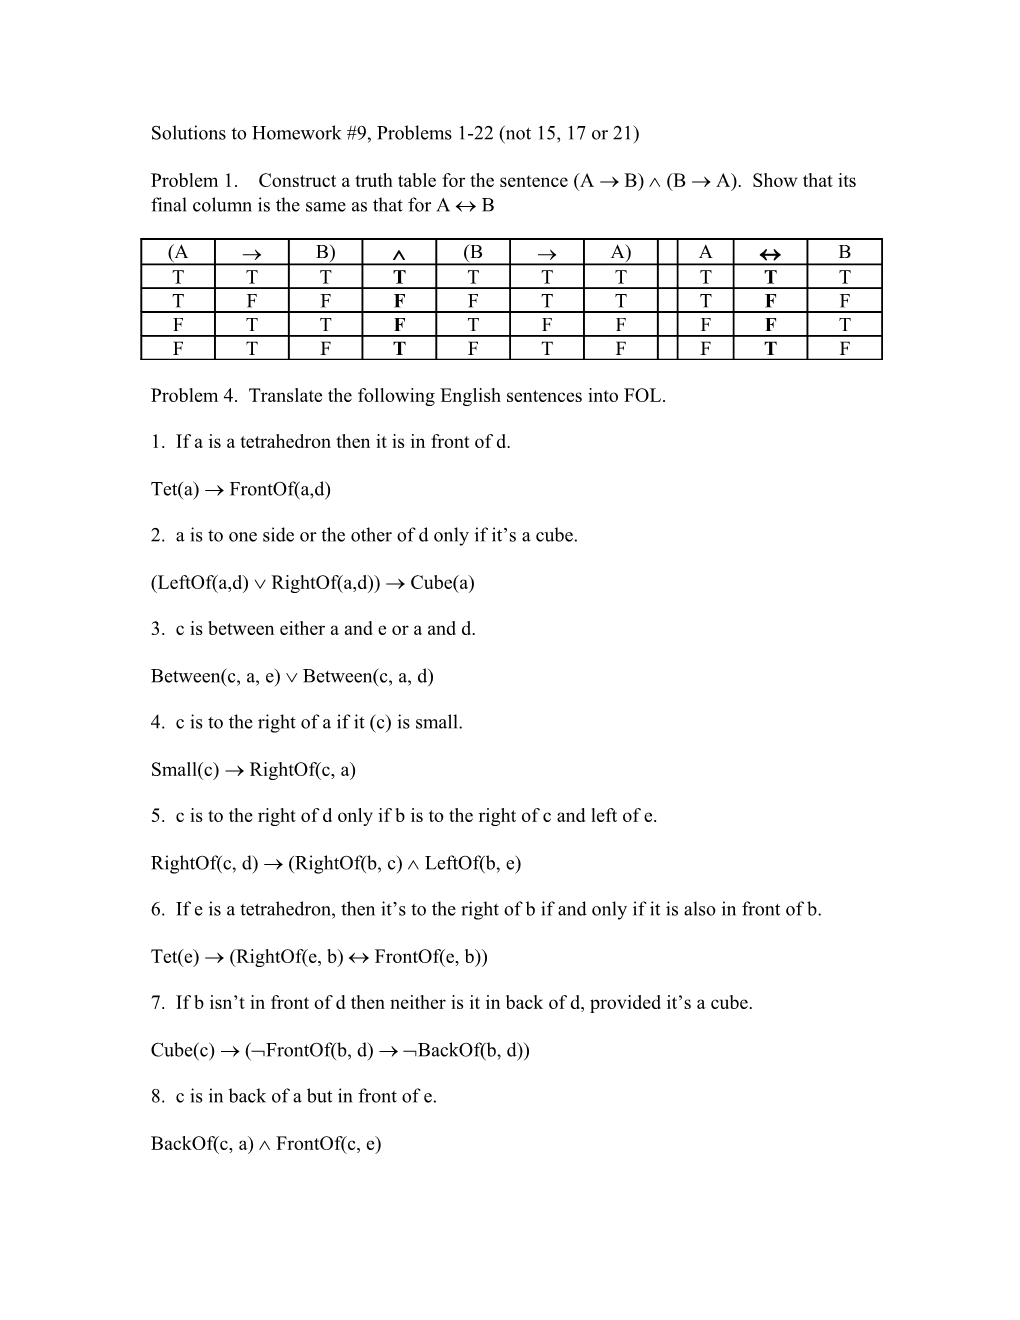 Solutions to Homework #9, Problems 23-29